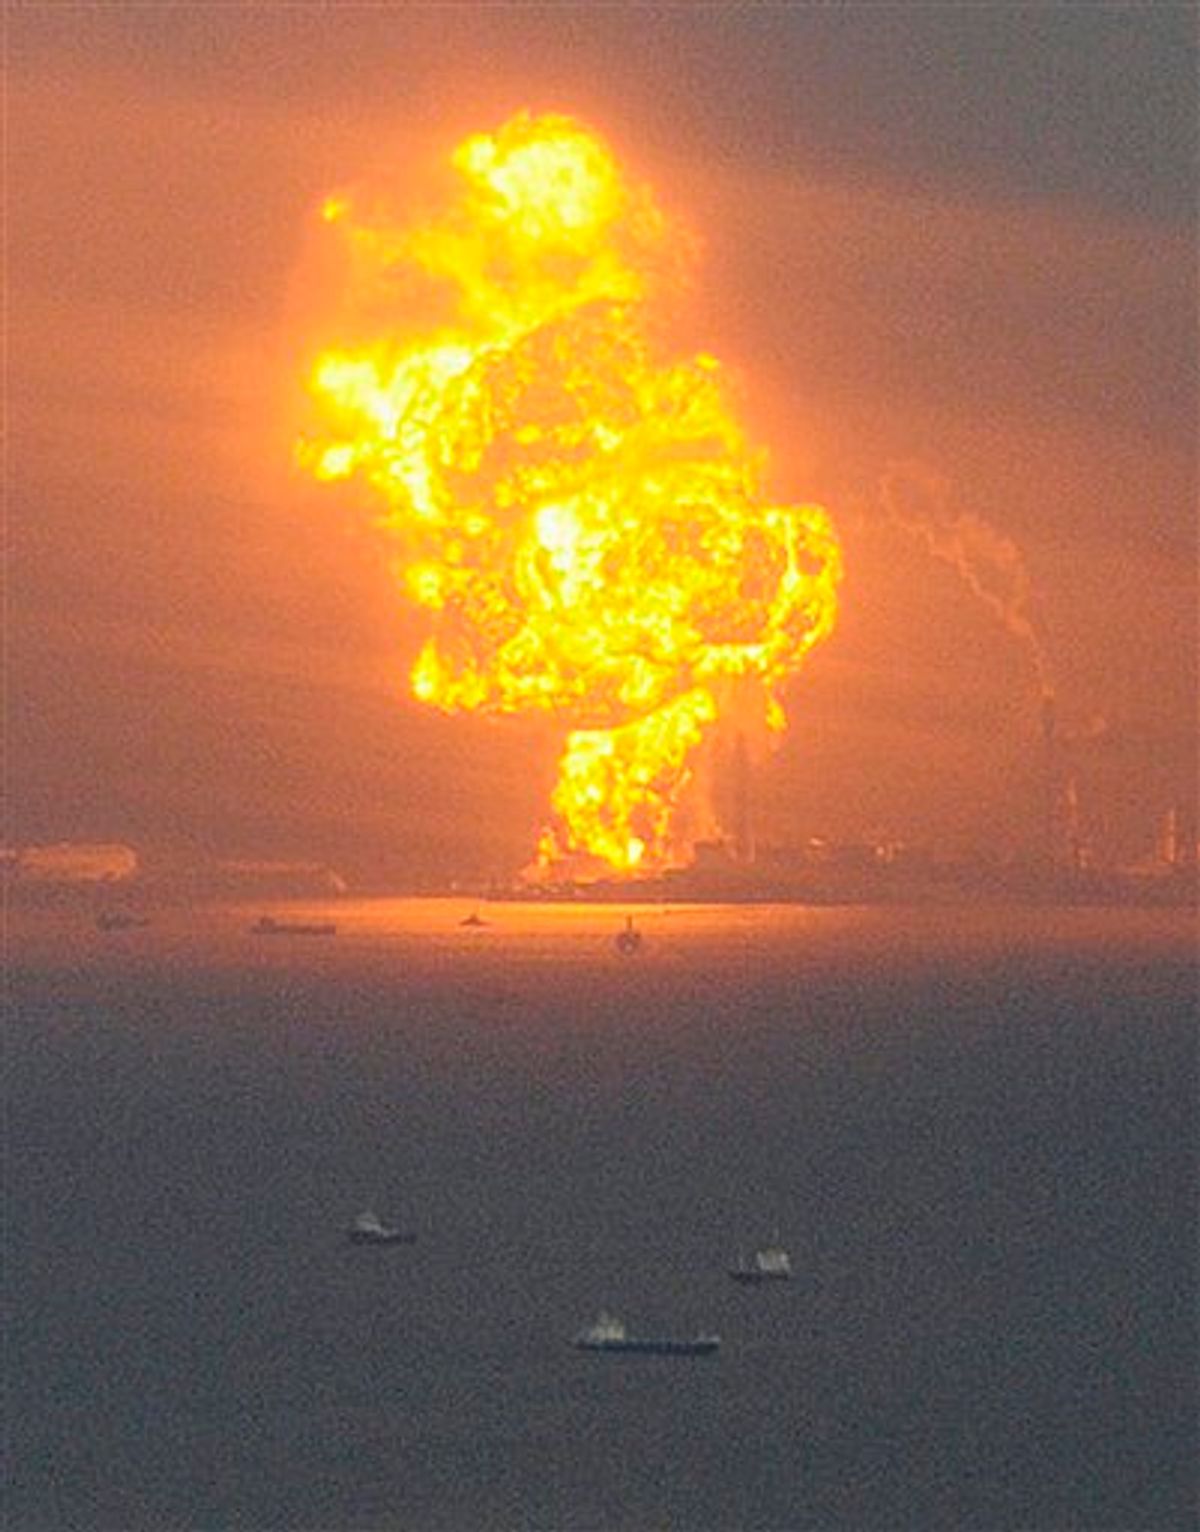 Flames rise from an oil refinery after a powerful earthquake in Ichihara, Chiba prefecture (state), Japan, Friday, March 11, 2011. The largest earthquake in Japan's recorded history slammed the eastern coast Friday. (AP Photo/Kyodo News) JAPAN OUT, MANDATORY CREDIT, FOR COMMERCIAL USE ONLY IN NORTH AMERICA (AP)